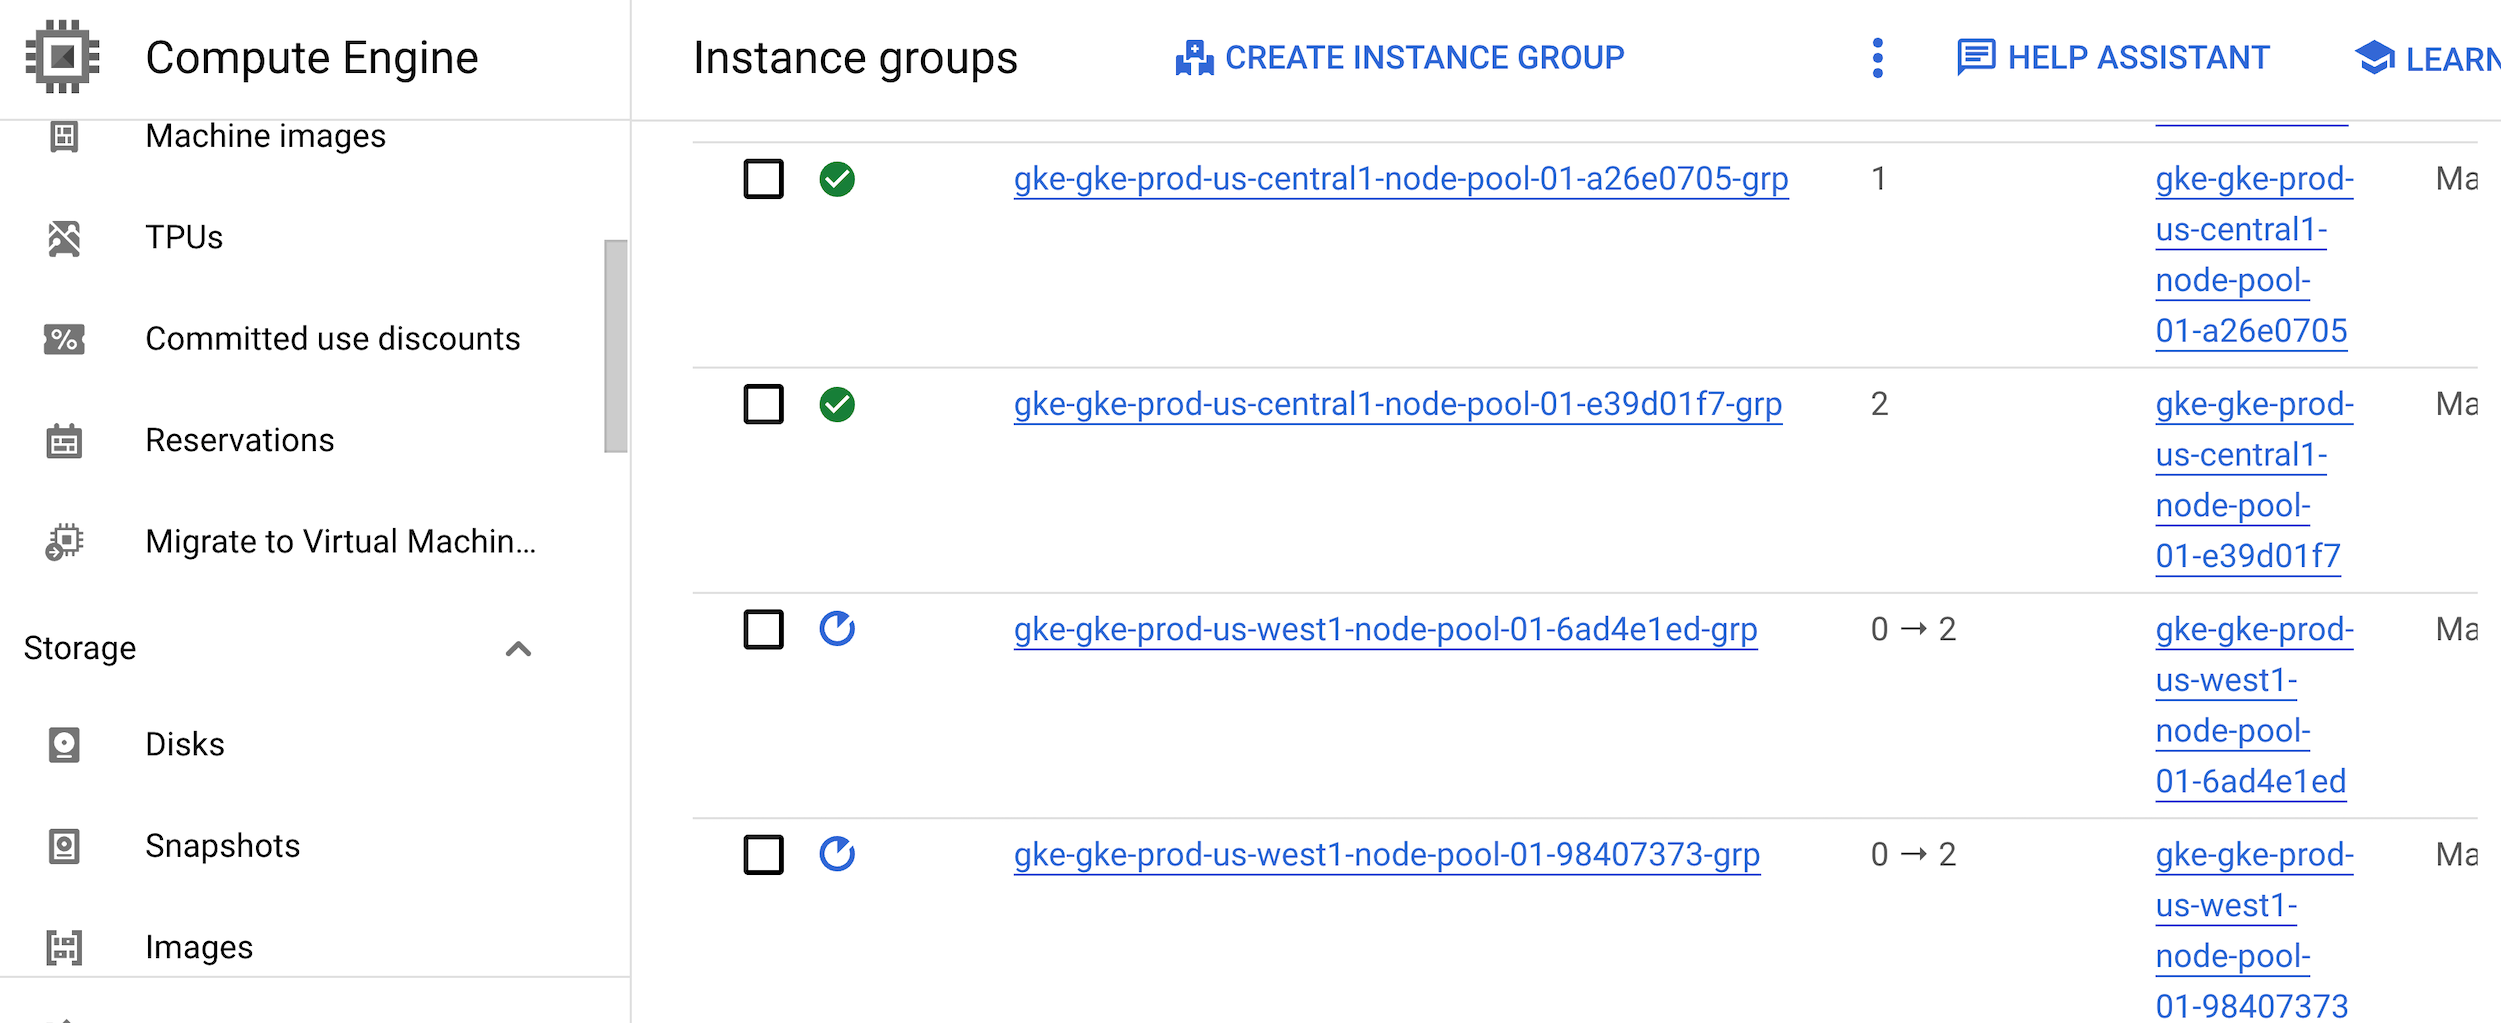 Status of the instance groups.